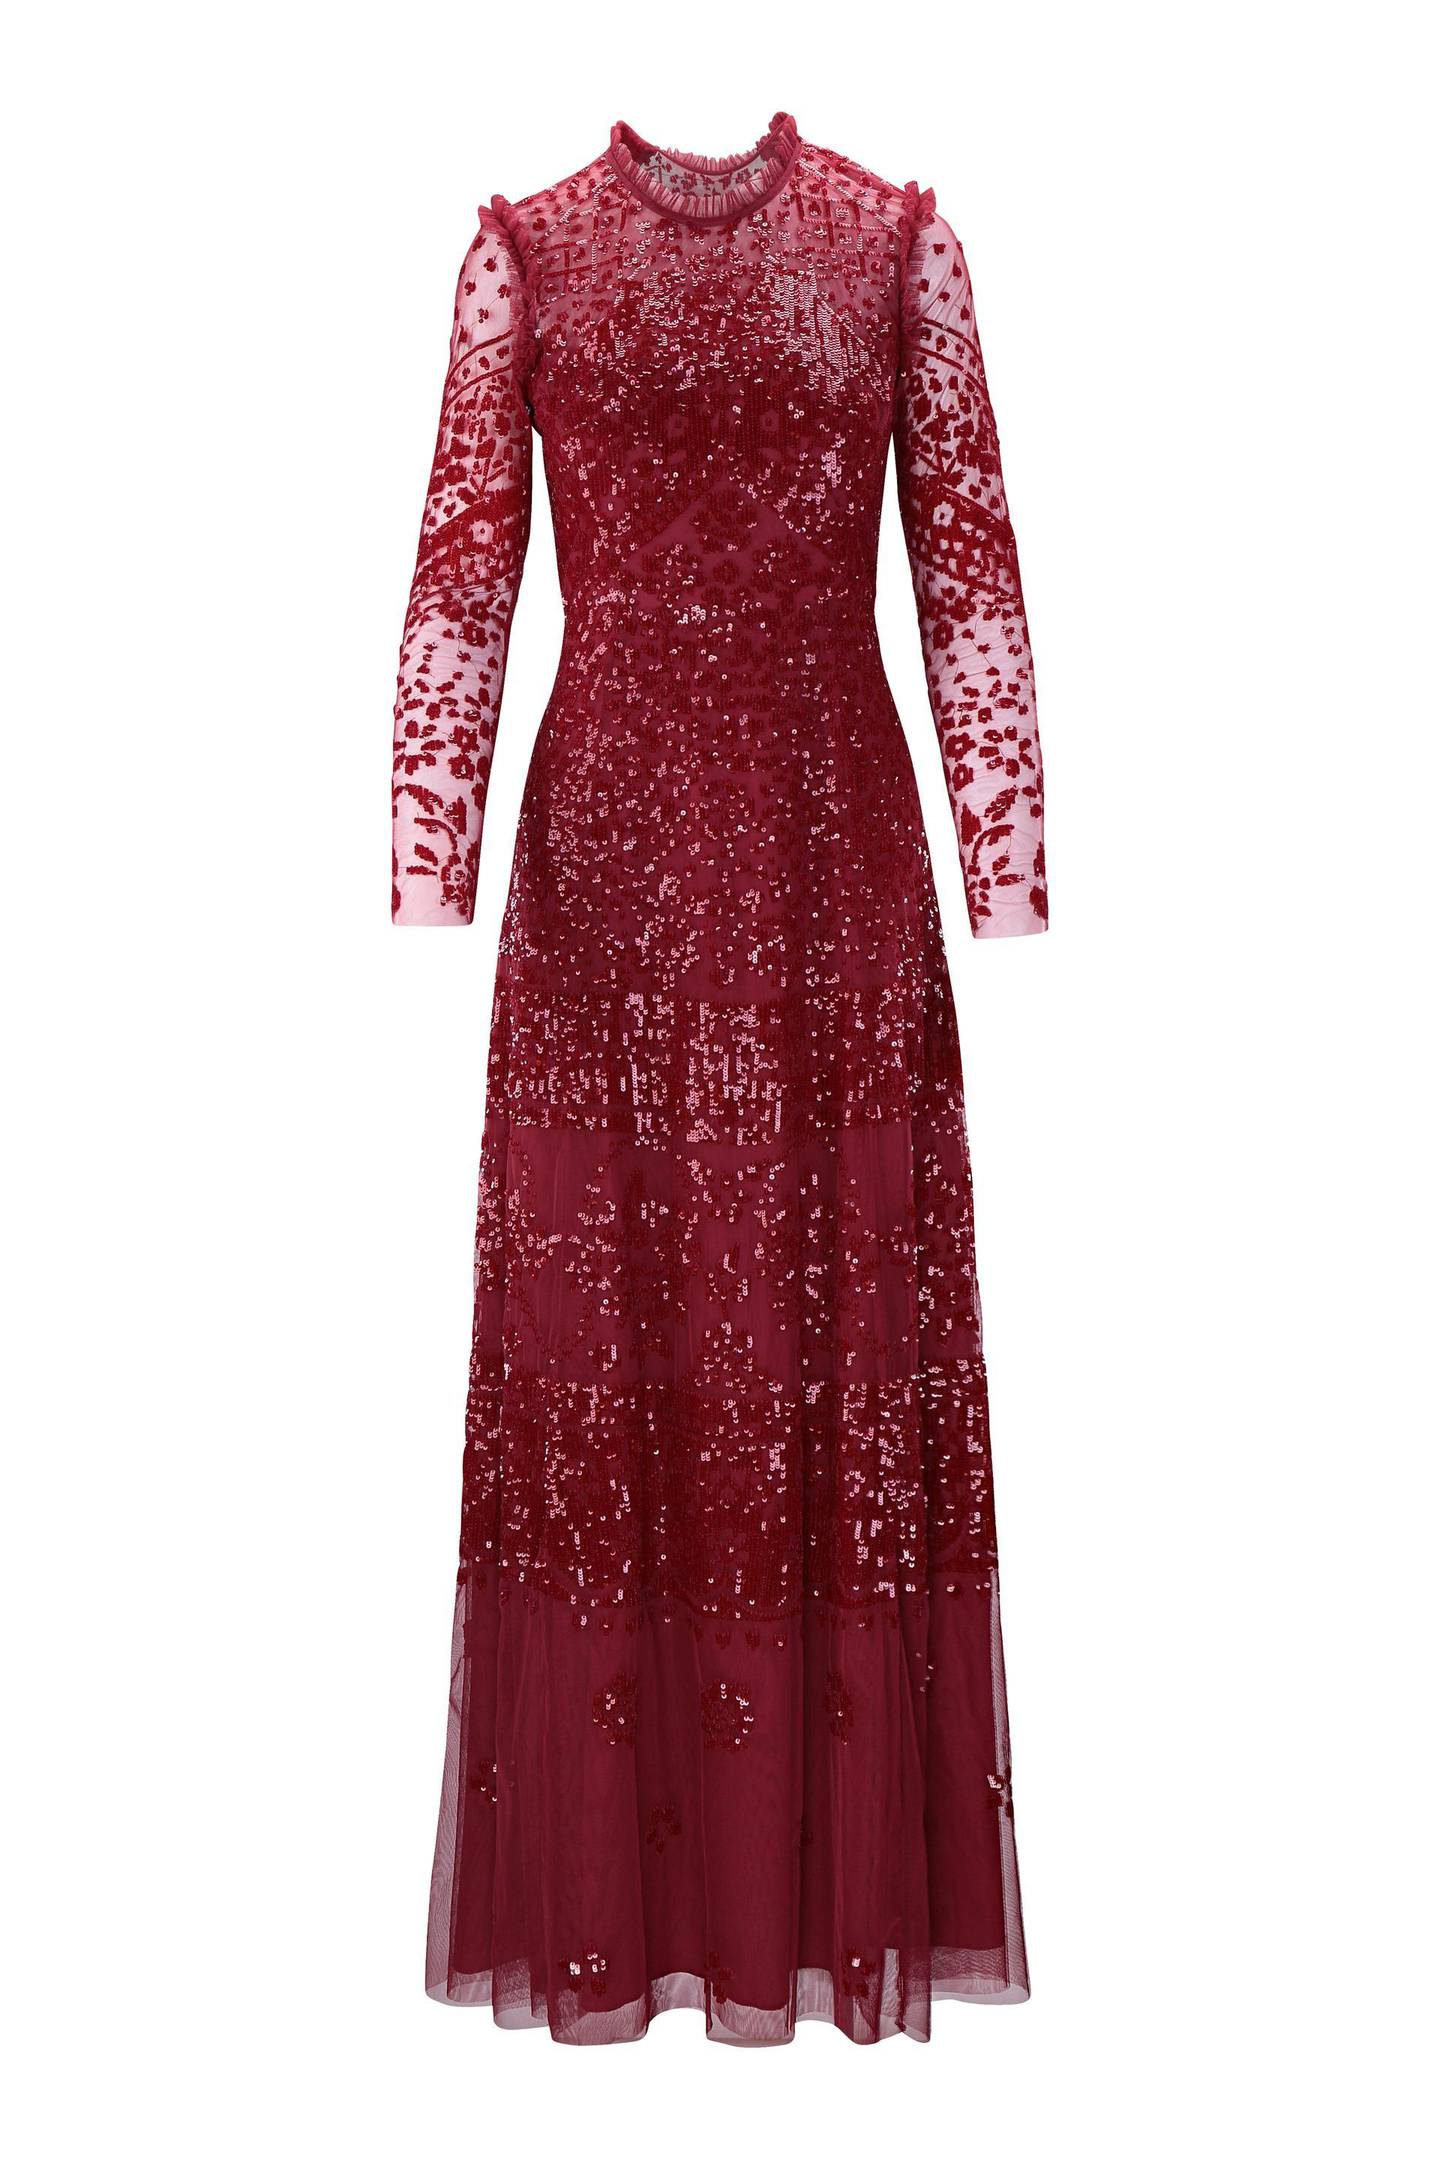 The Aurora gown by Needle and Thread retails at Dh2,255 at Robinsons, Dubai Festival City Mall. Courtesy Robinsons 